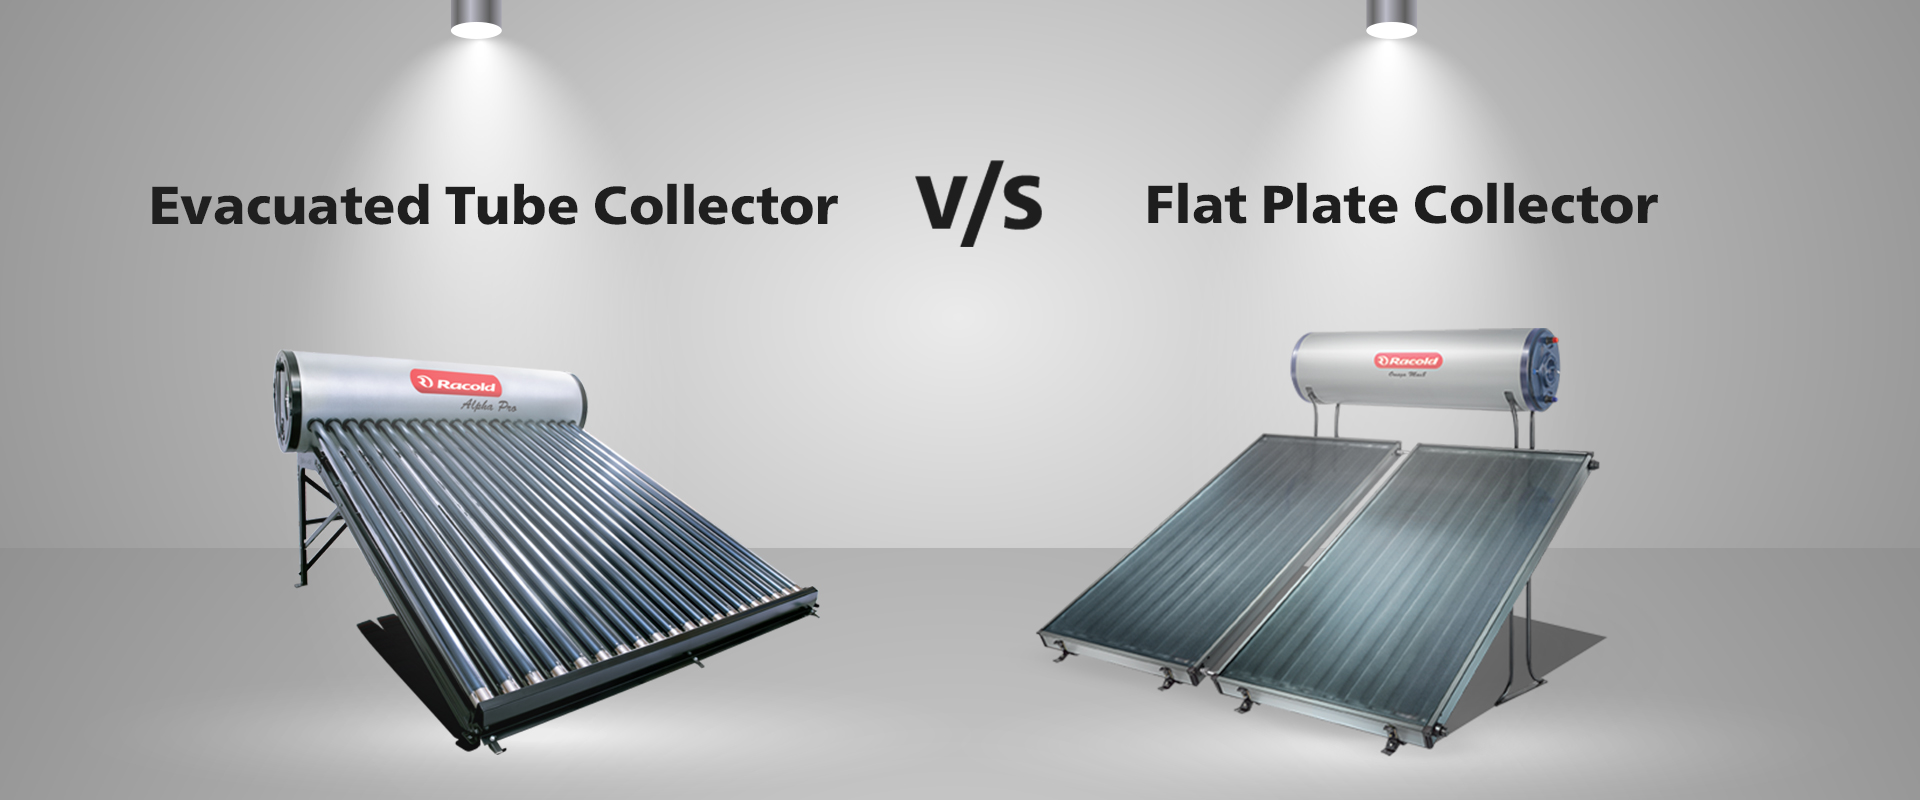 Evacuated Tube Collector and Flat Plate Collector in a Solar Heater